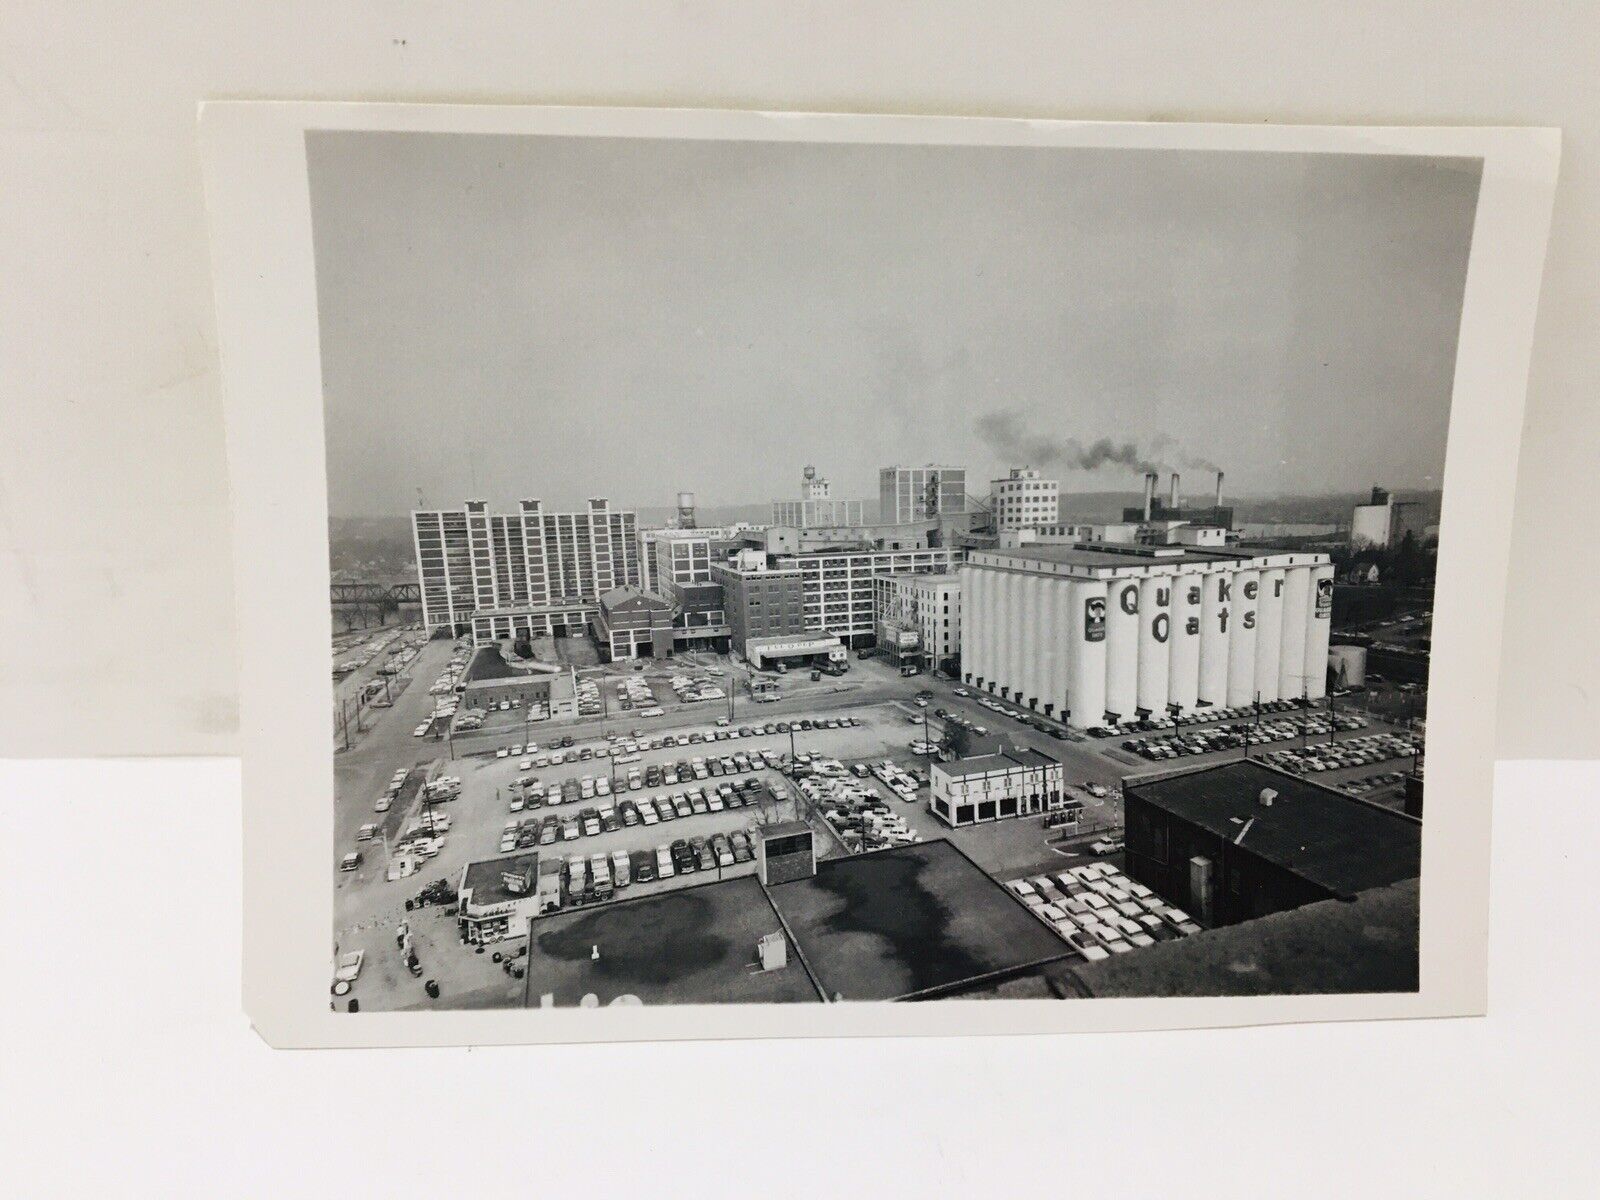  Vintage Real Photo View Quaker Oats Factory Parking Lot Smoke Pollution B&W US